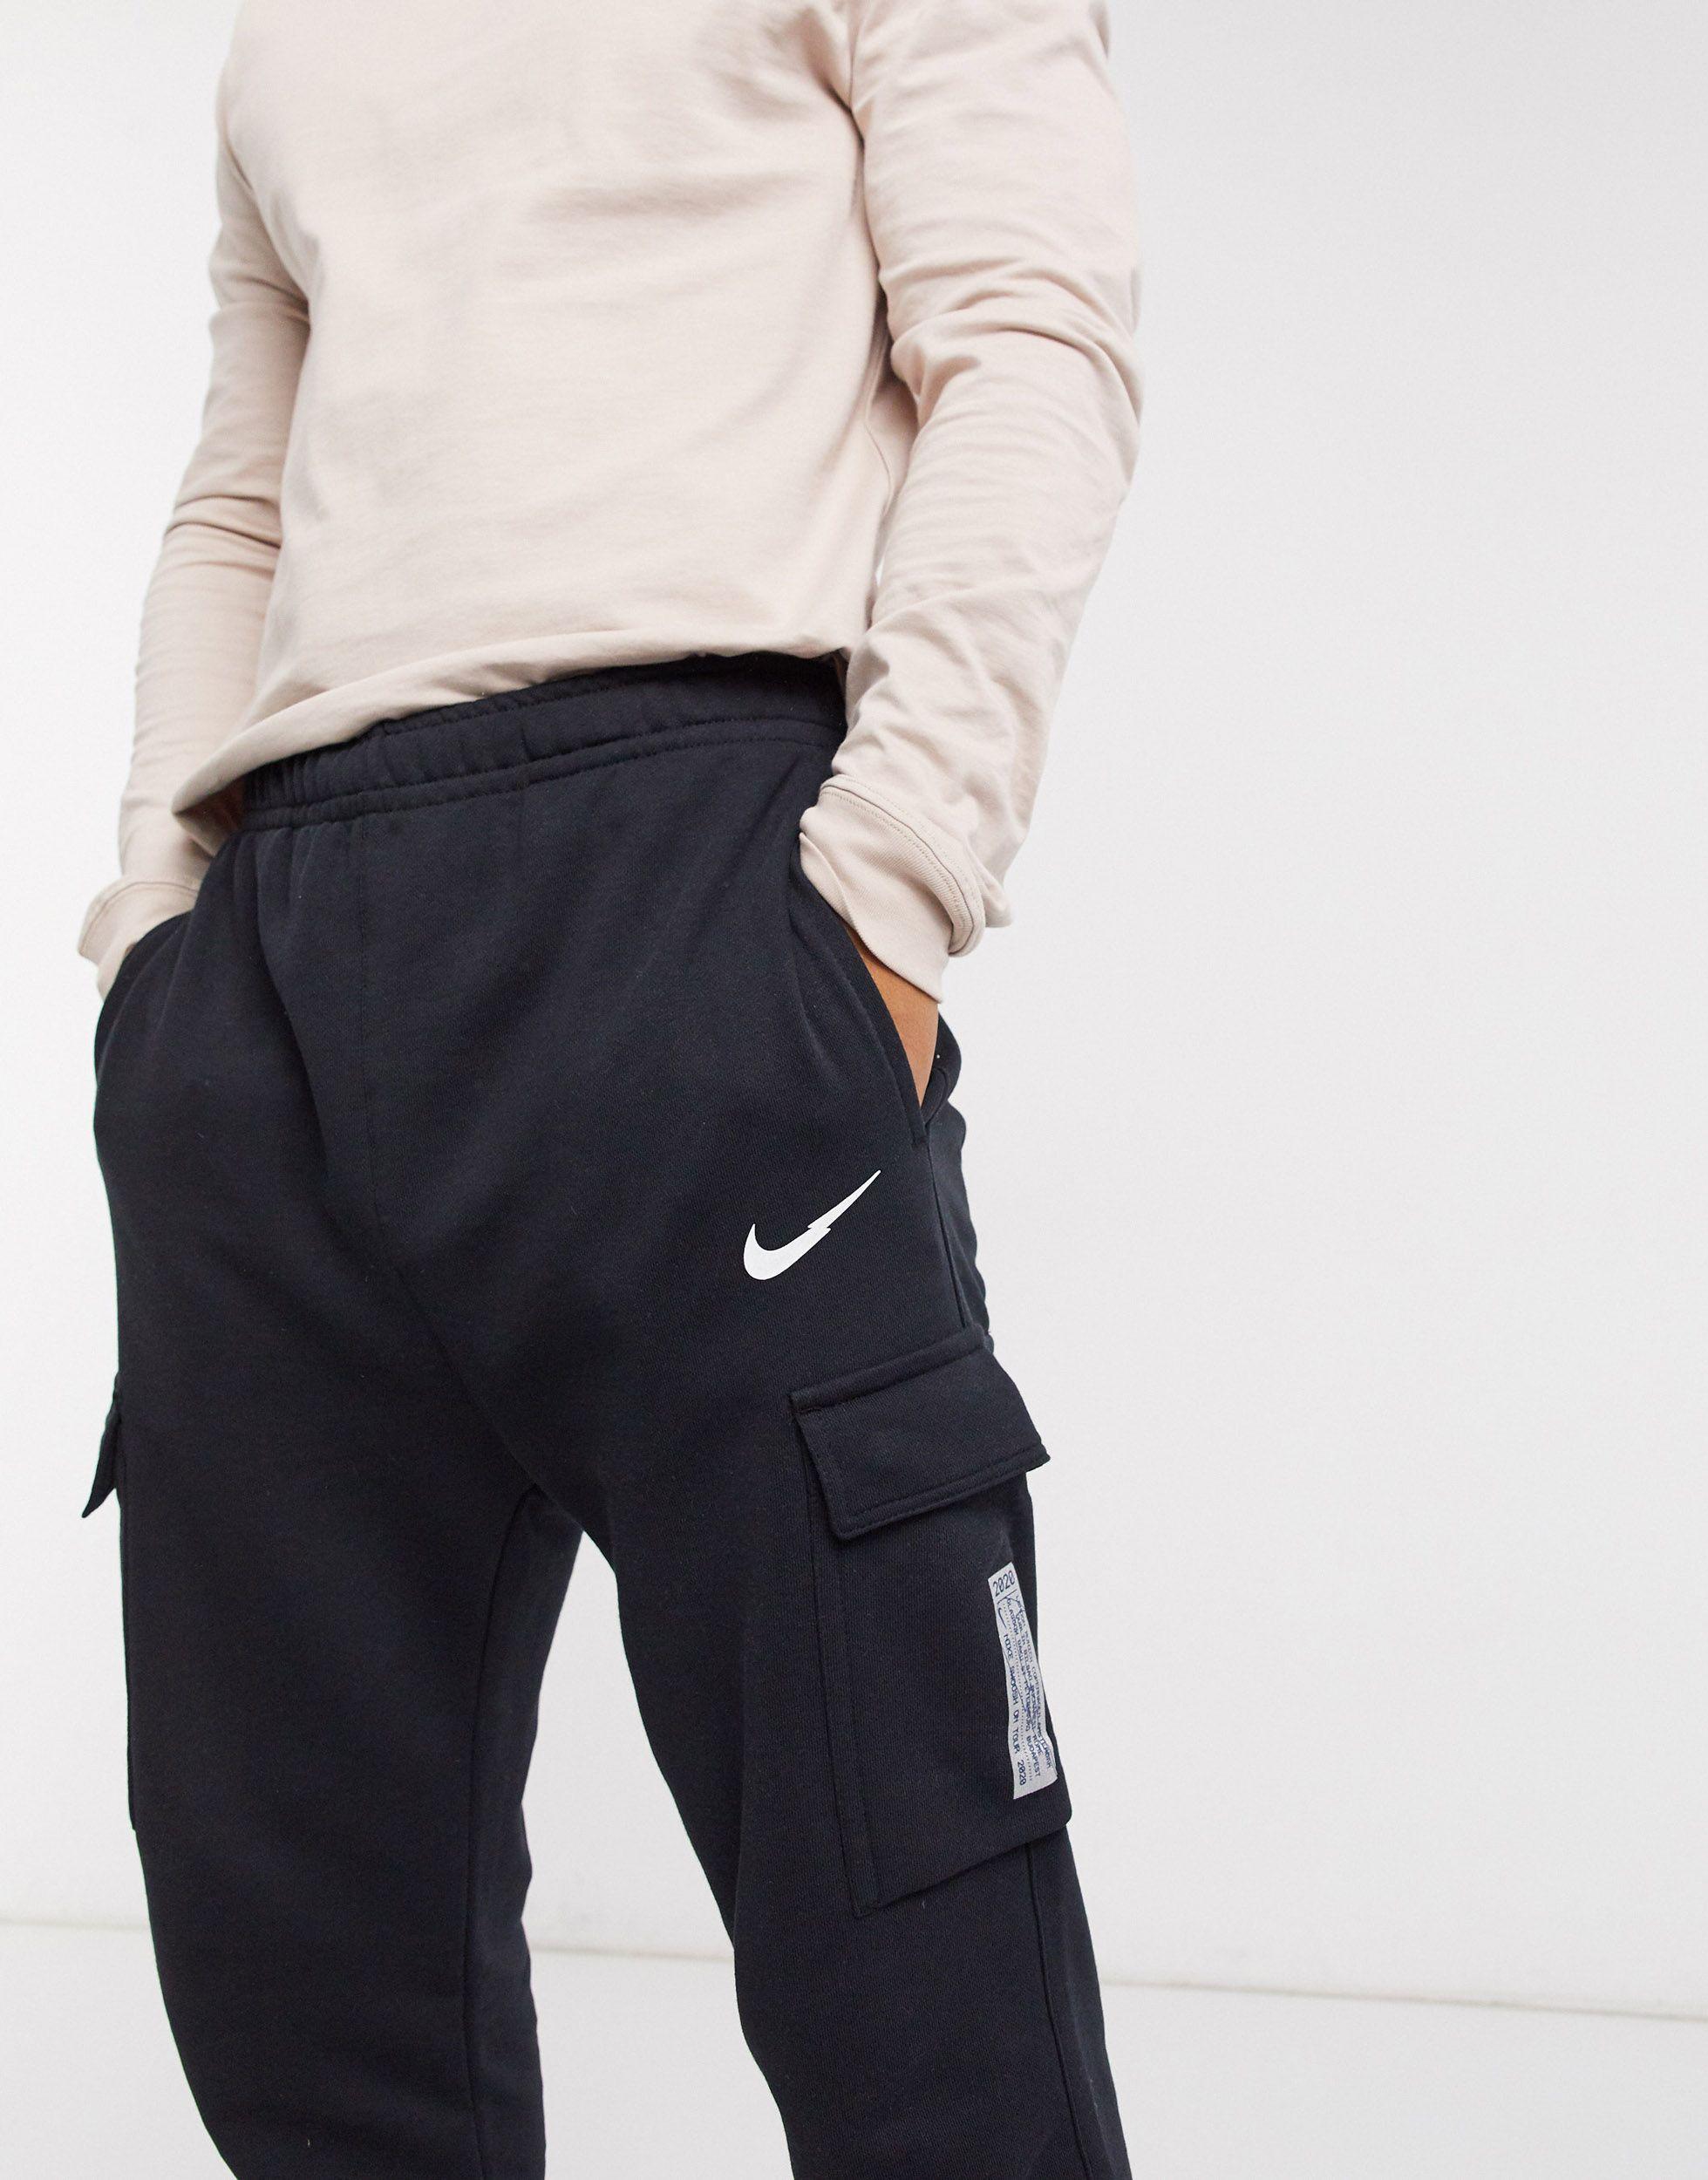 On Tour Pack - Joggers cargo neri con 